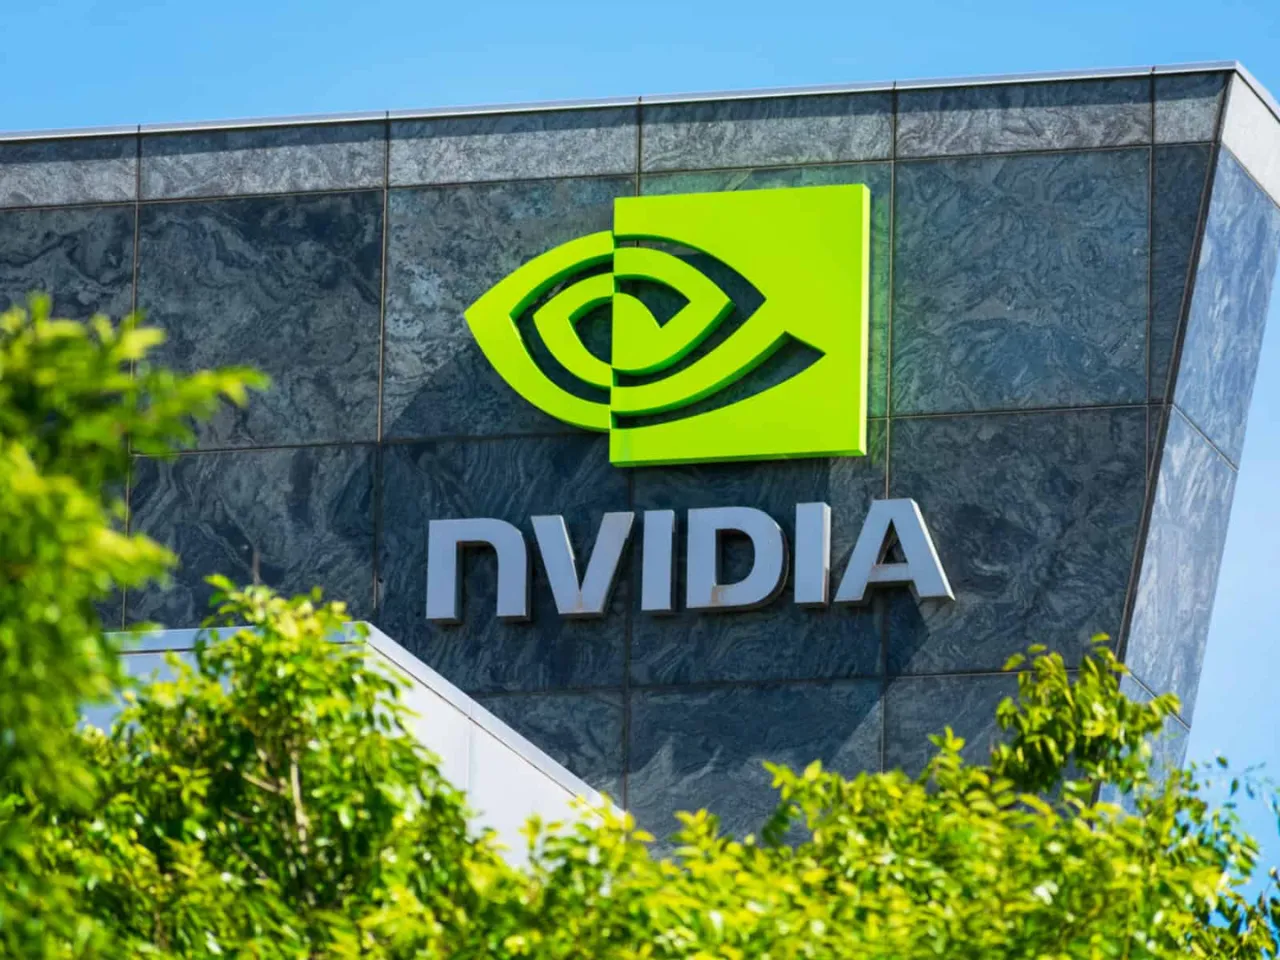 NVIDIA seeks to deepen its ties with Indian companies to deploy its AI solutions